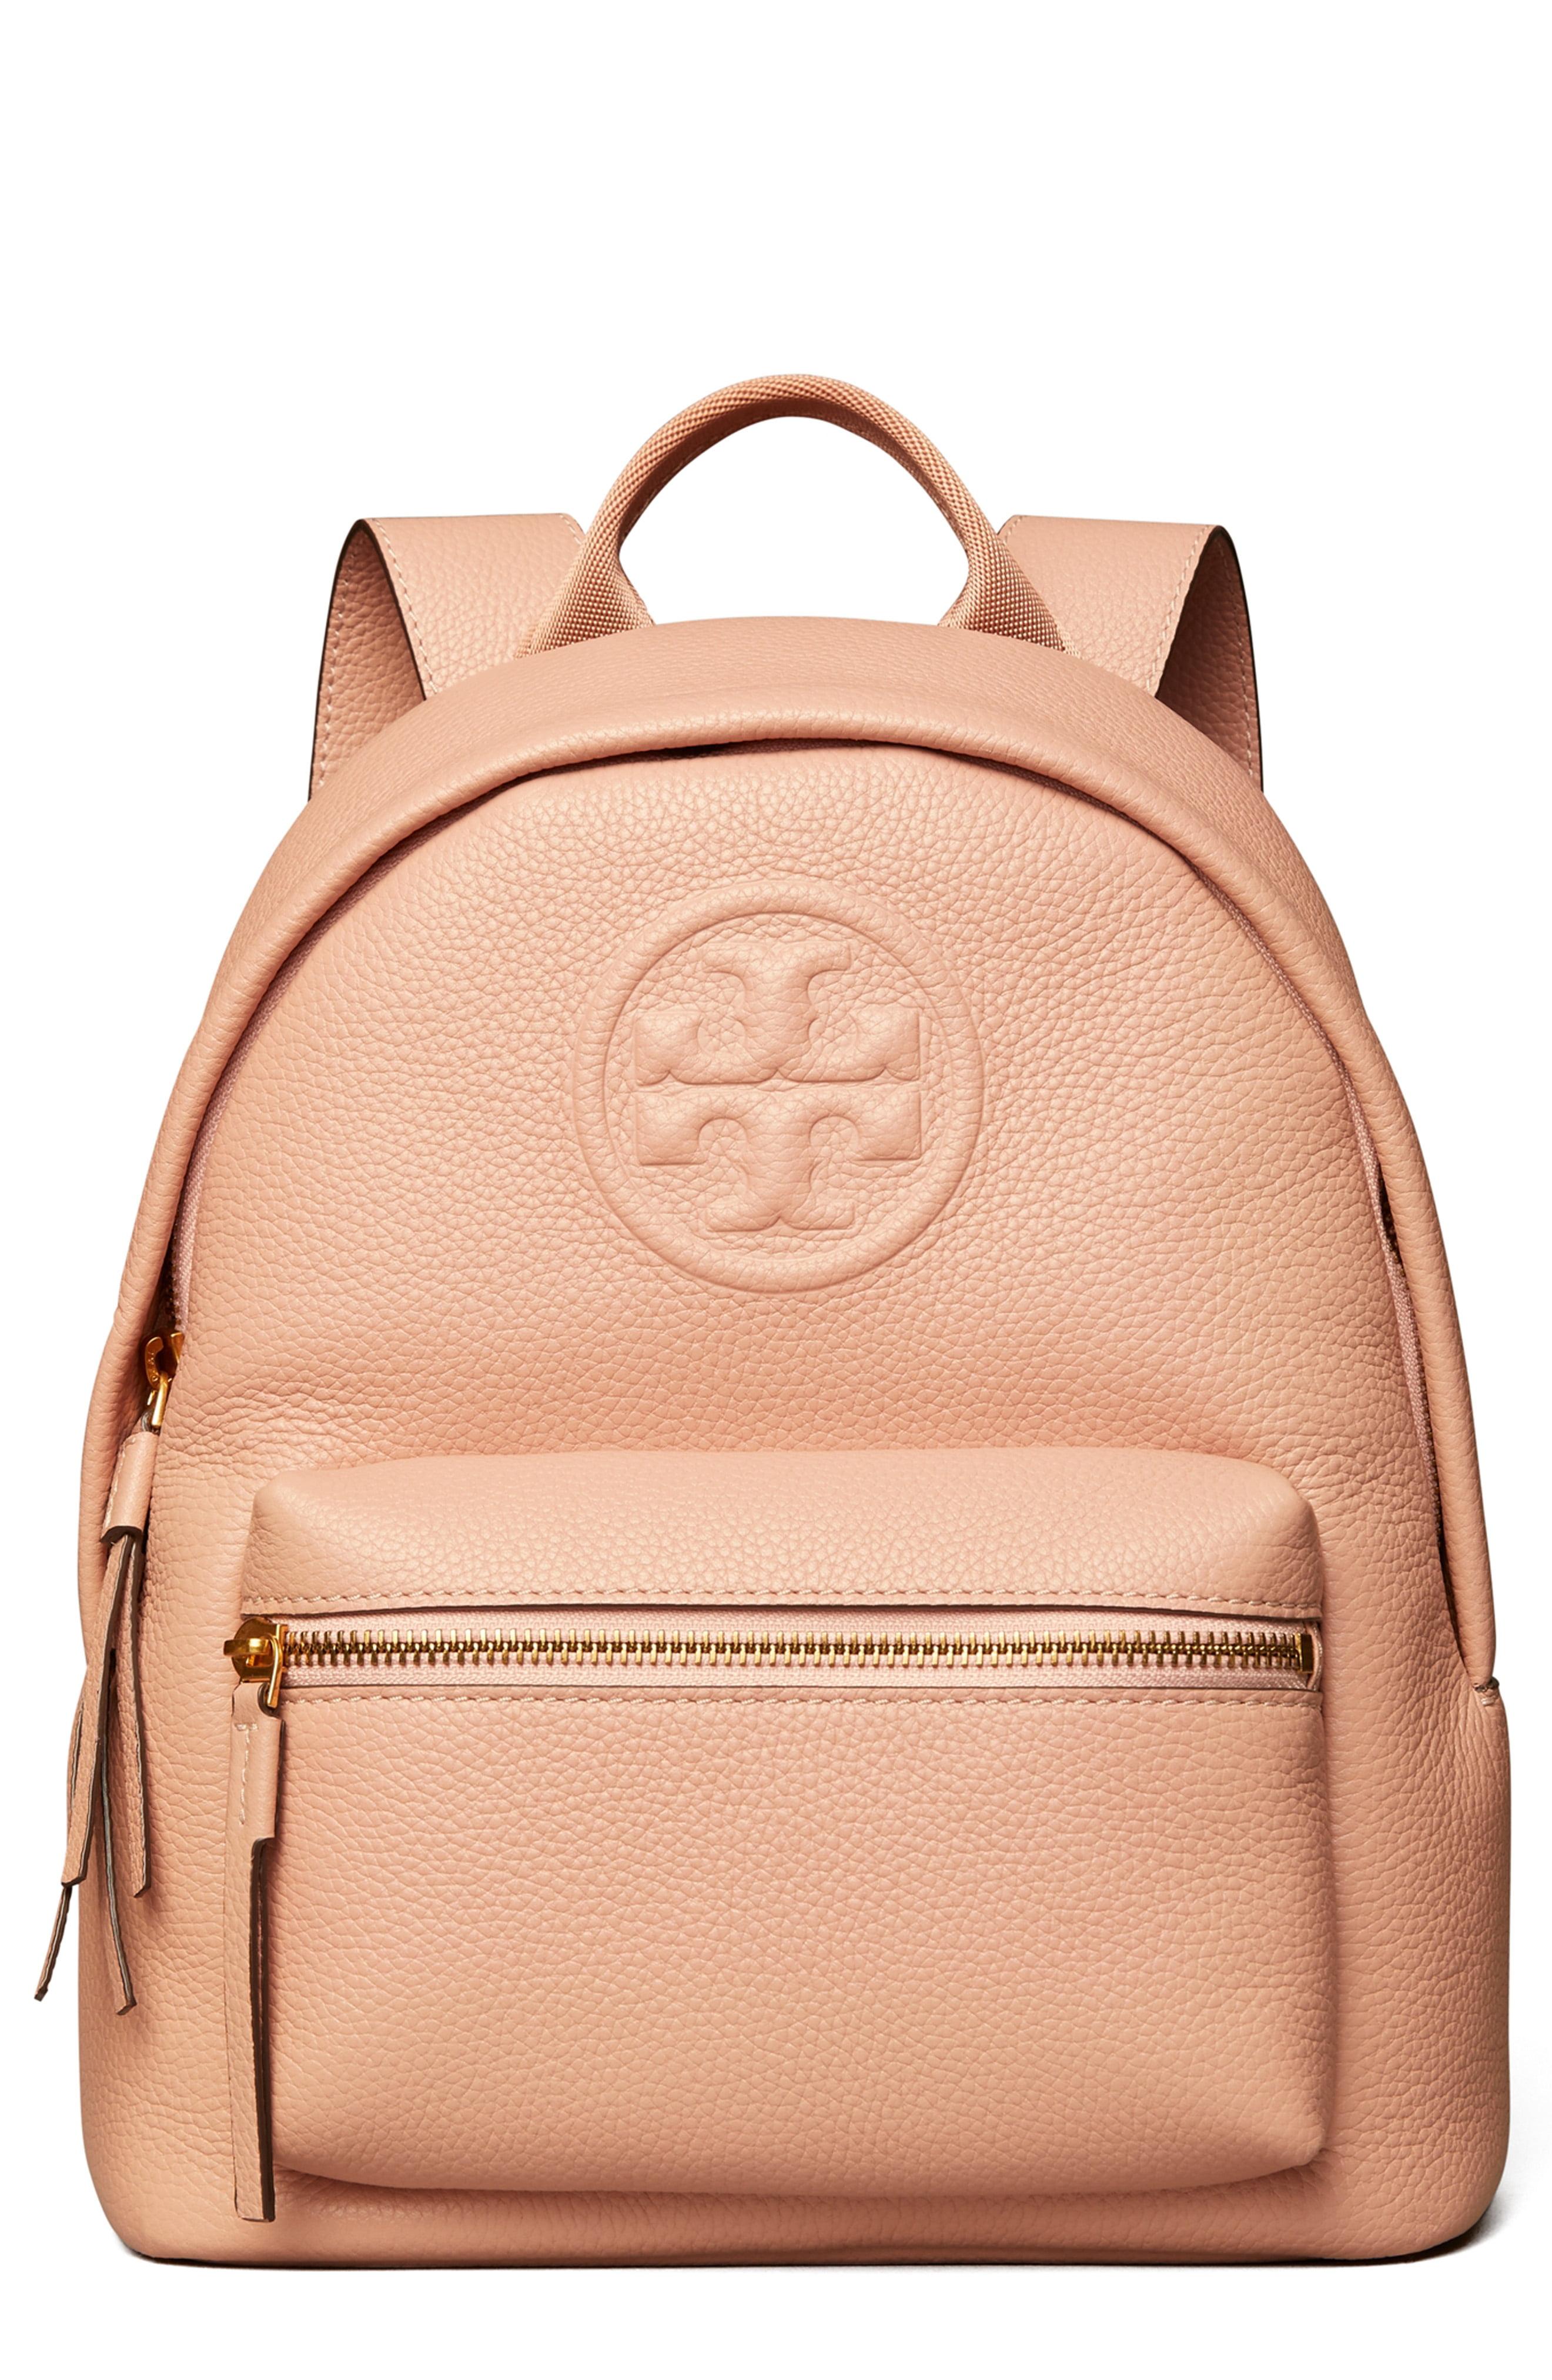 Tory Burch Mini Leather Backpack Light Pink 